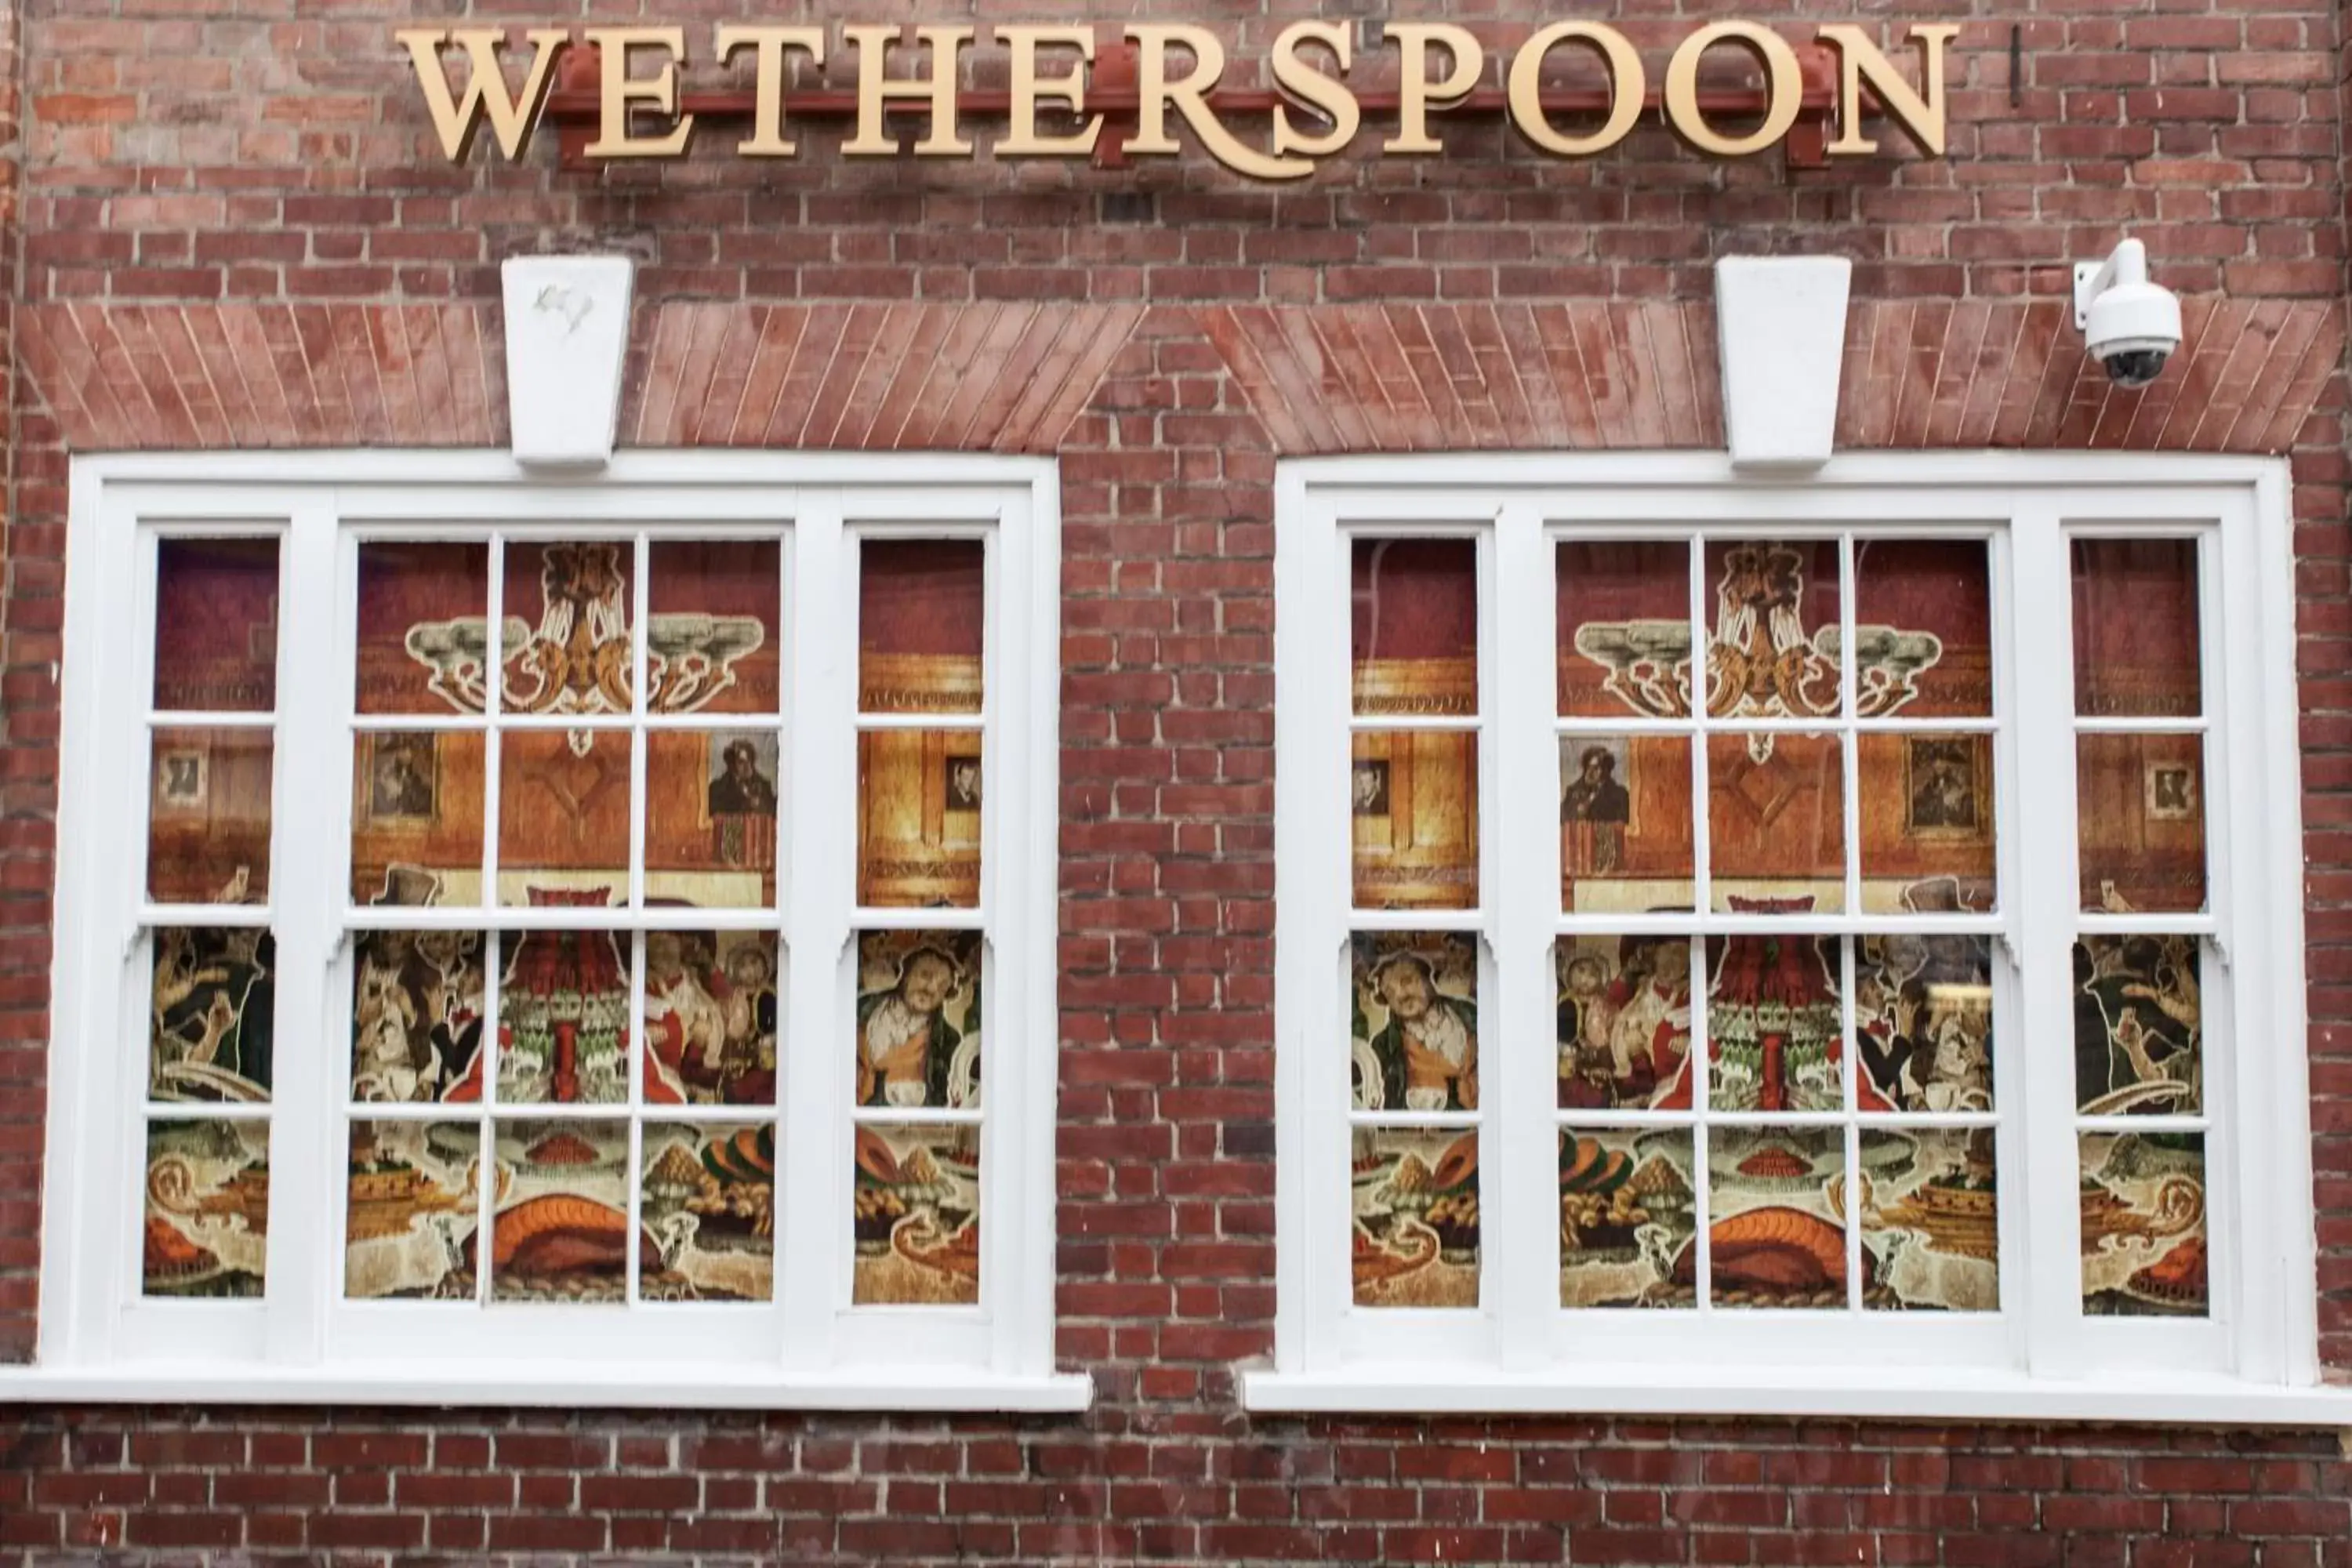 On site, Property Building in The King's Head Hotel Wetherspoon